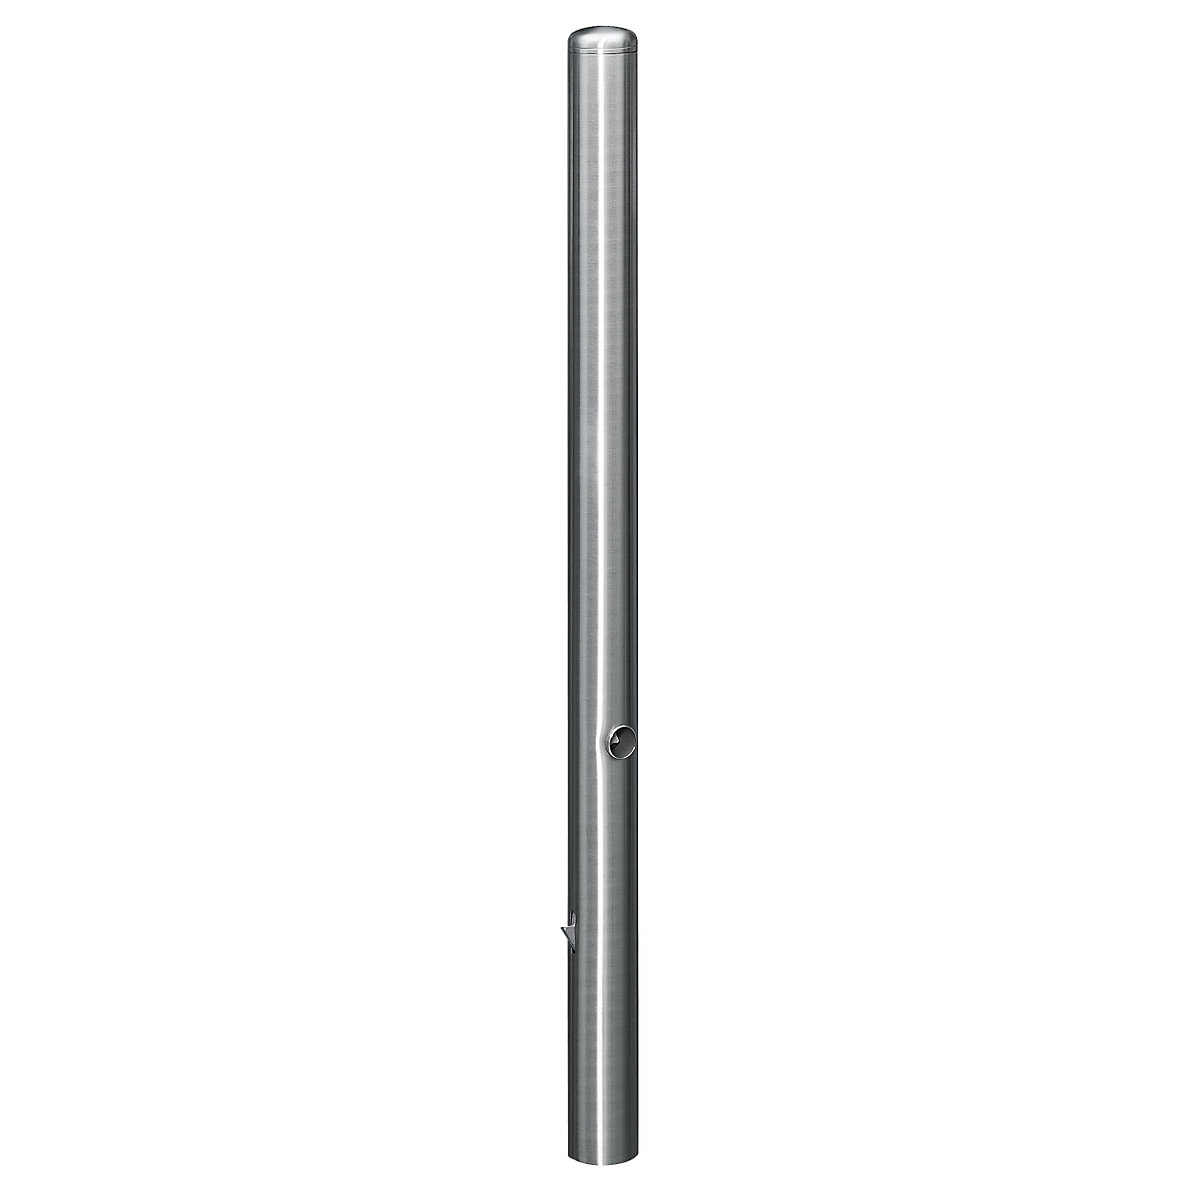 Stainless steel barrier post, with end cap, ground sleeve for concreting in, Ø 102 mm, triangular lock-7